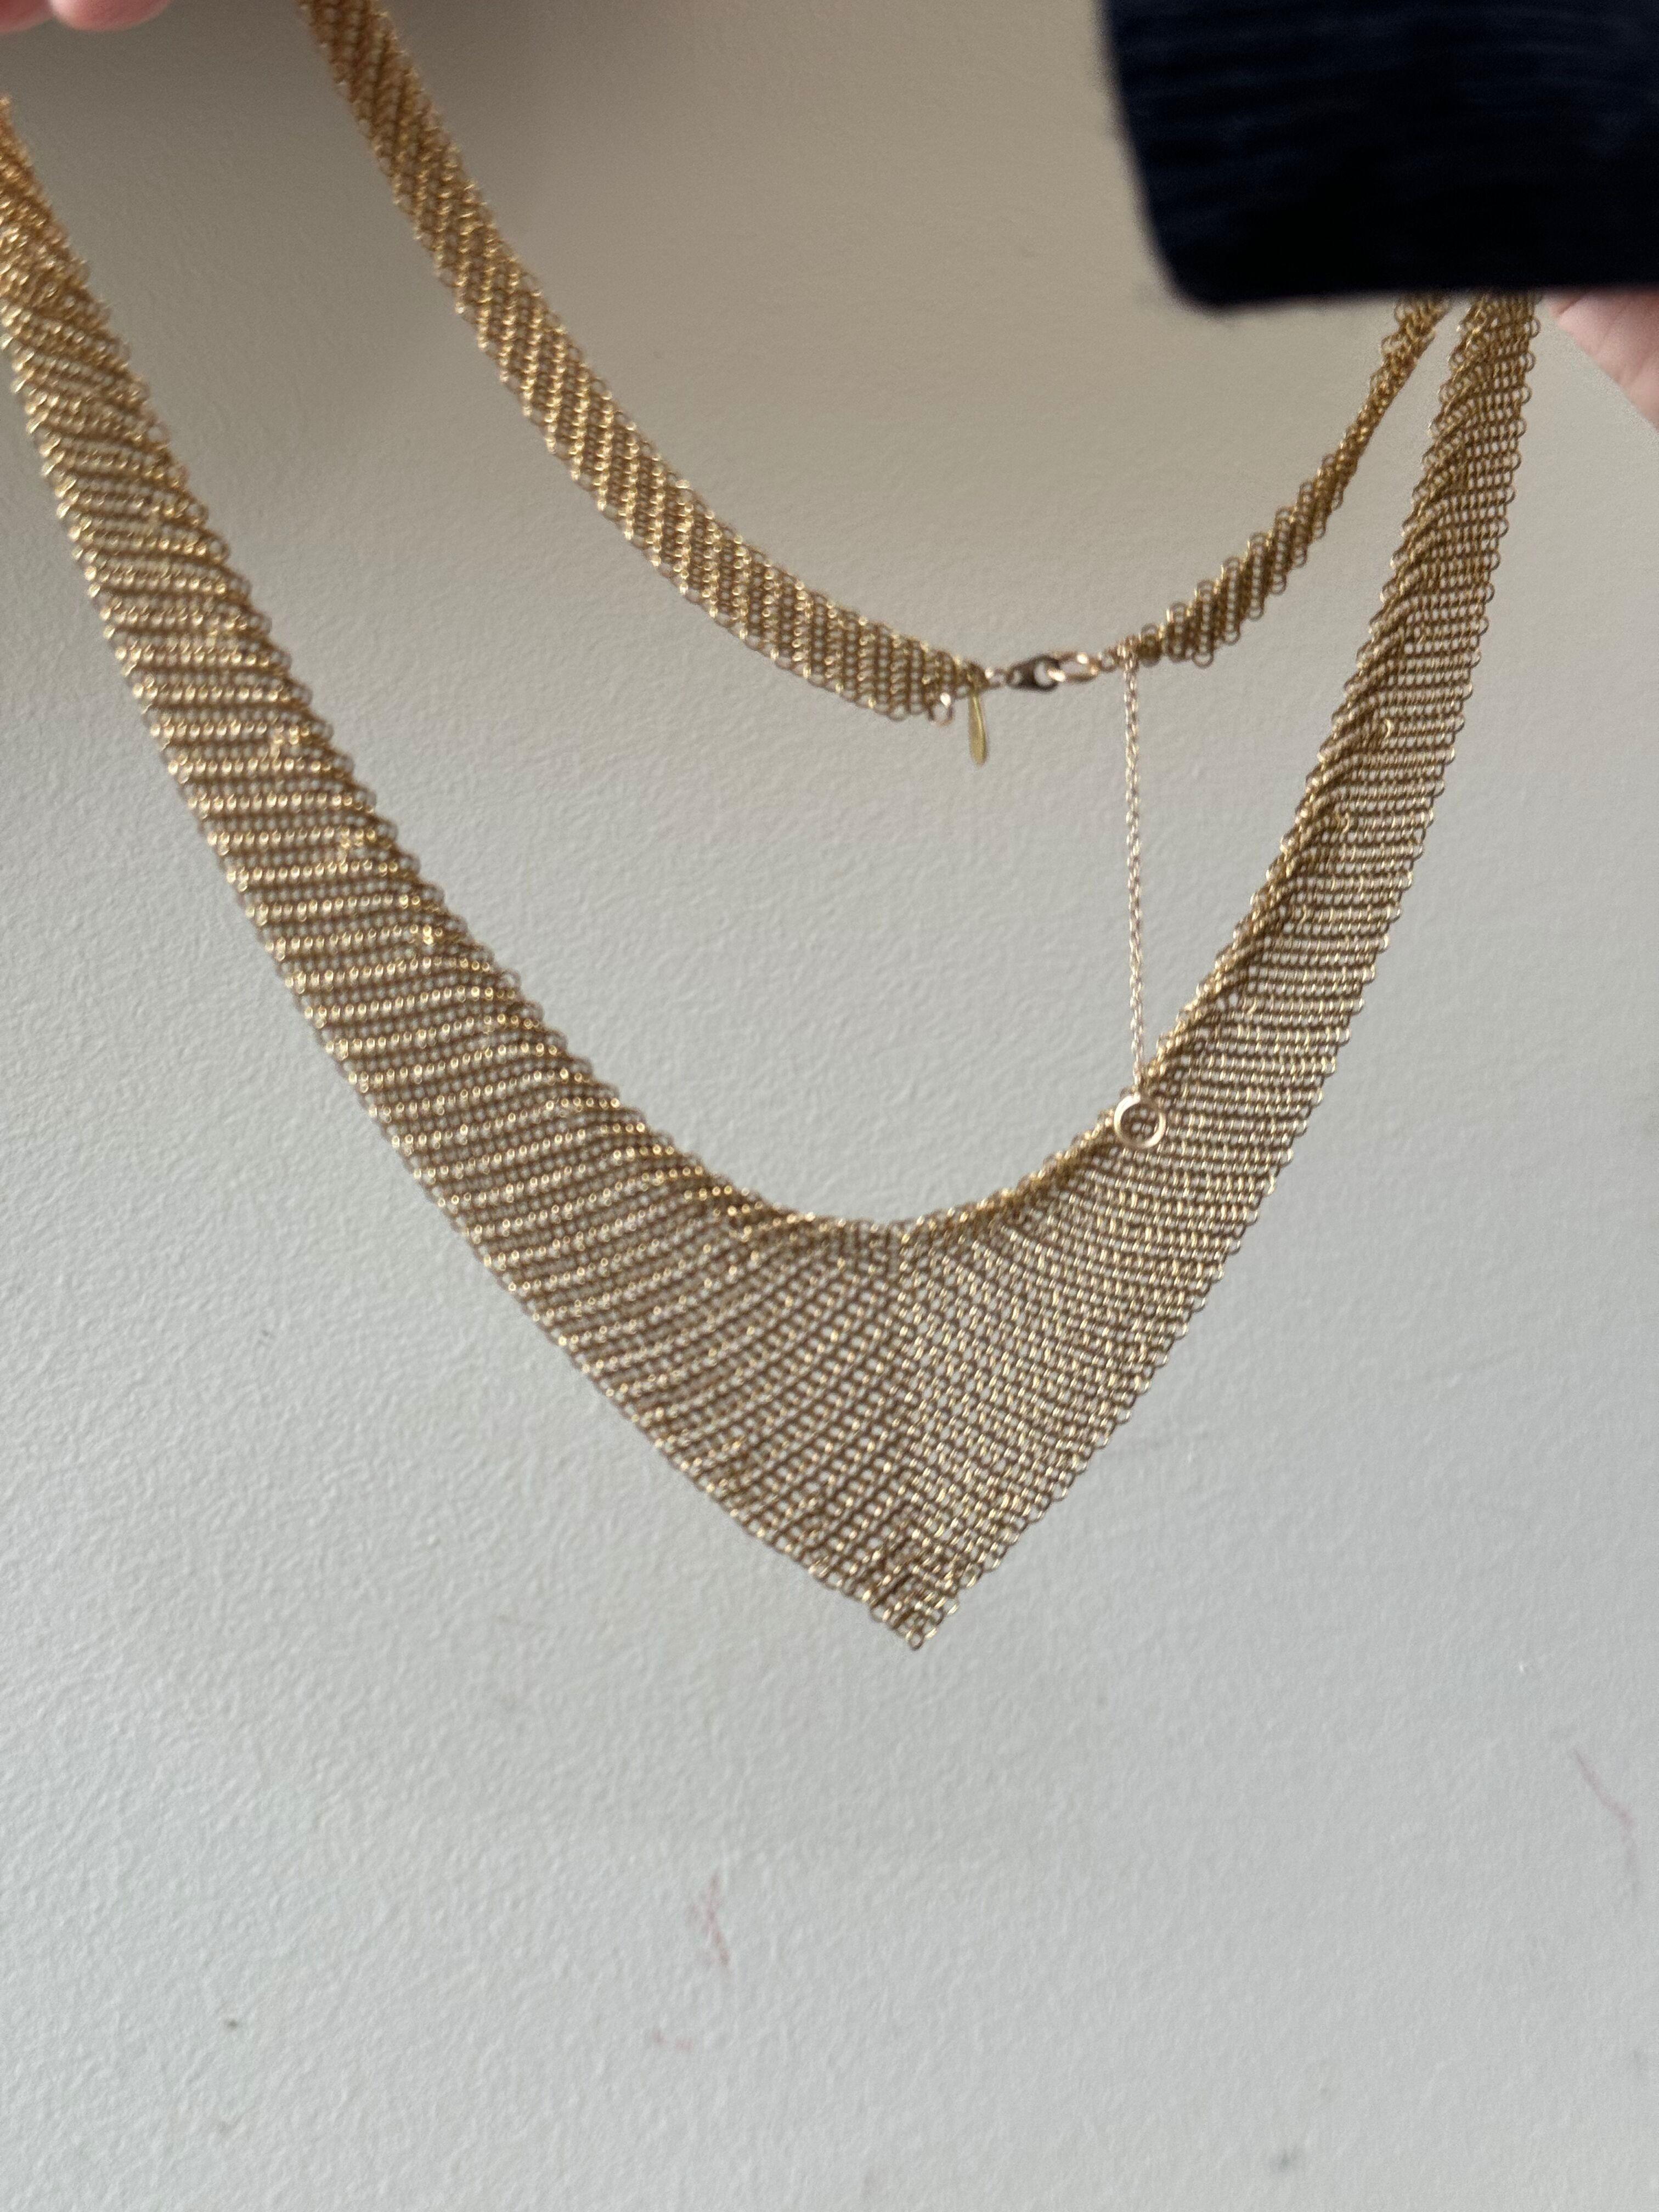 Elsa Peretti for Tiffany & Co Mesh Scarf Gold Necklace In Excellent Condition For Sale In New York, NY